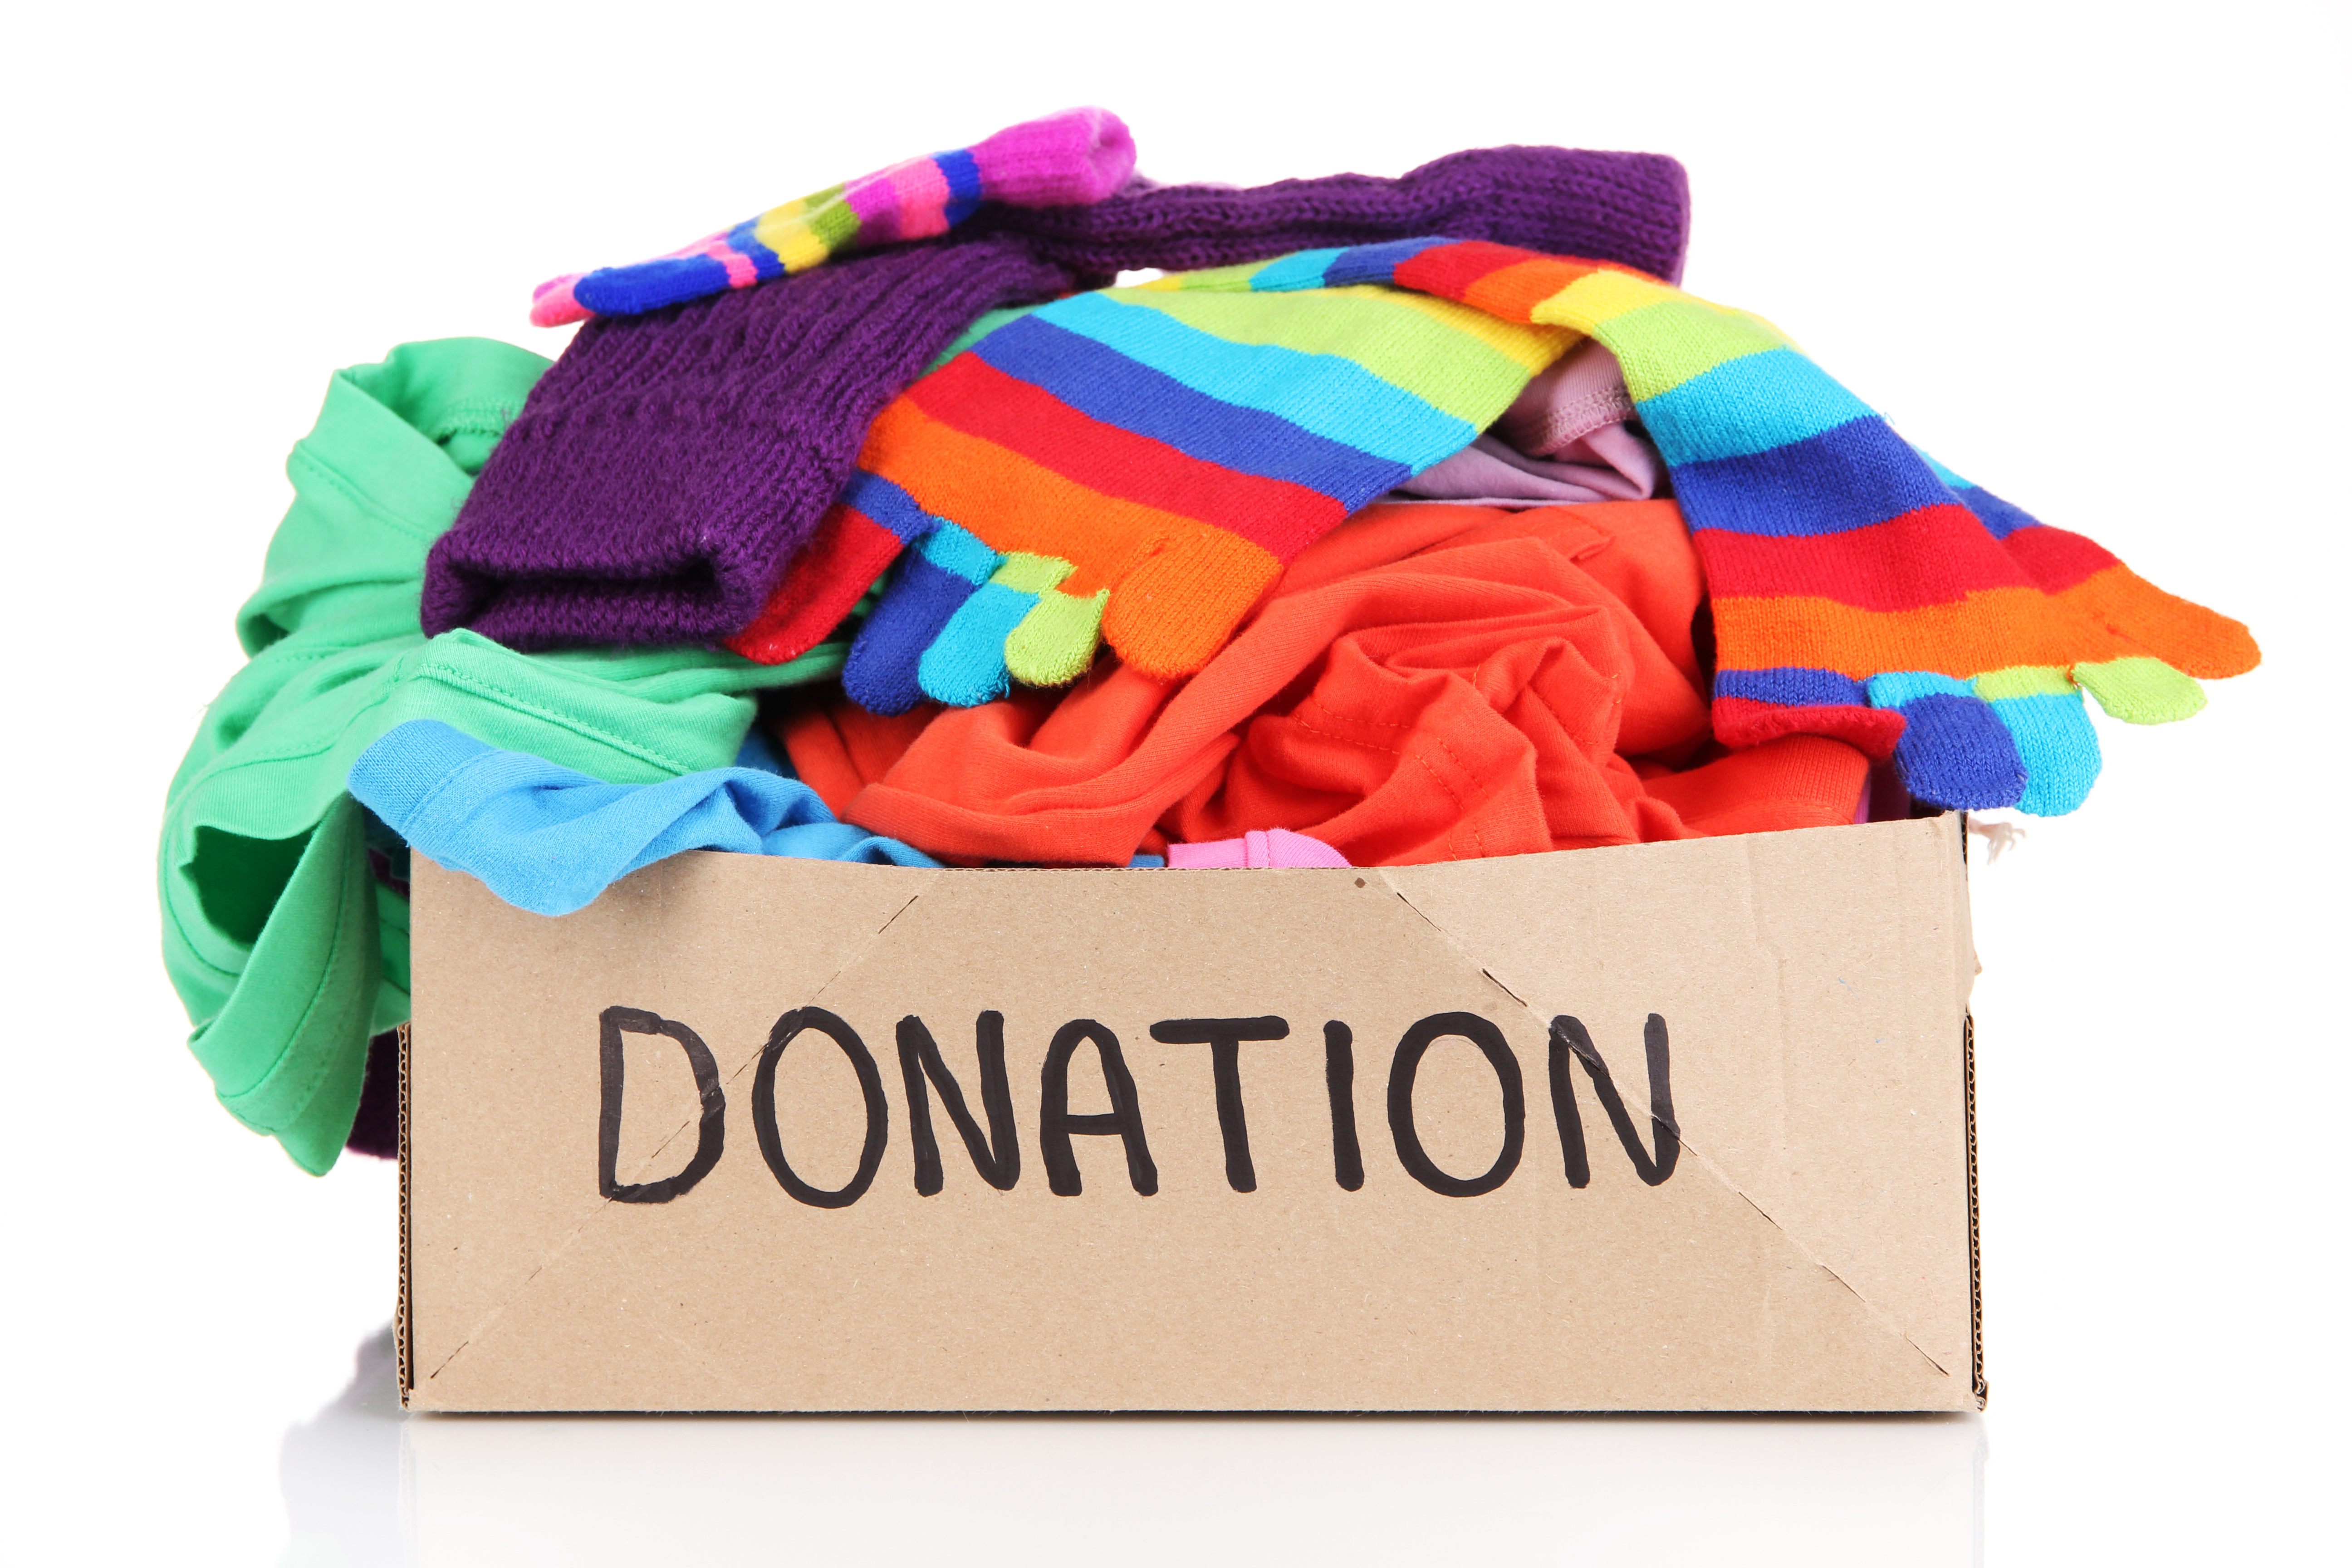 Five National Charities For Donation Pick Up